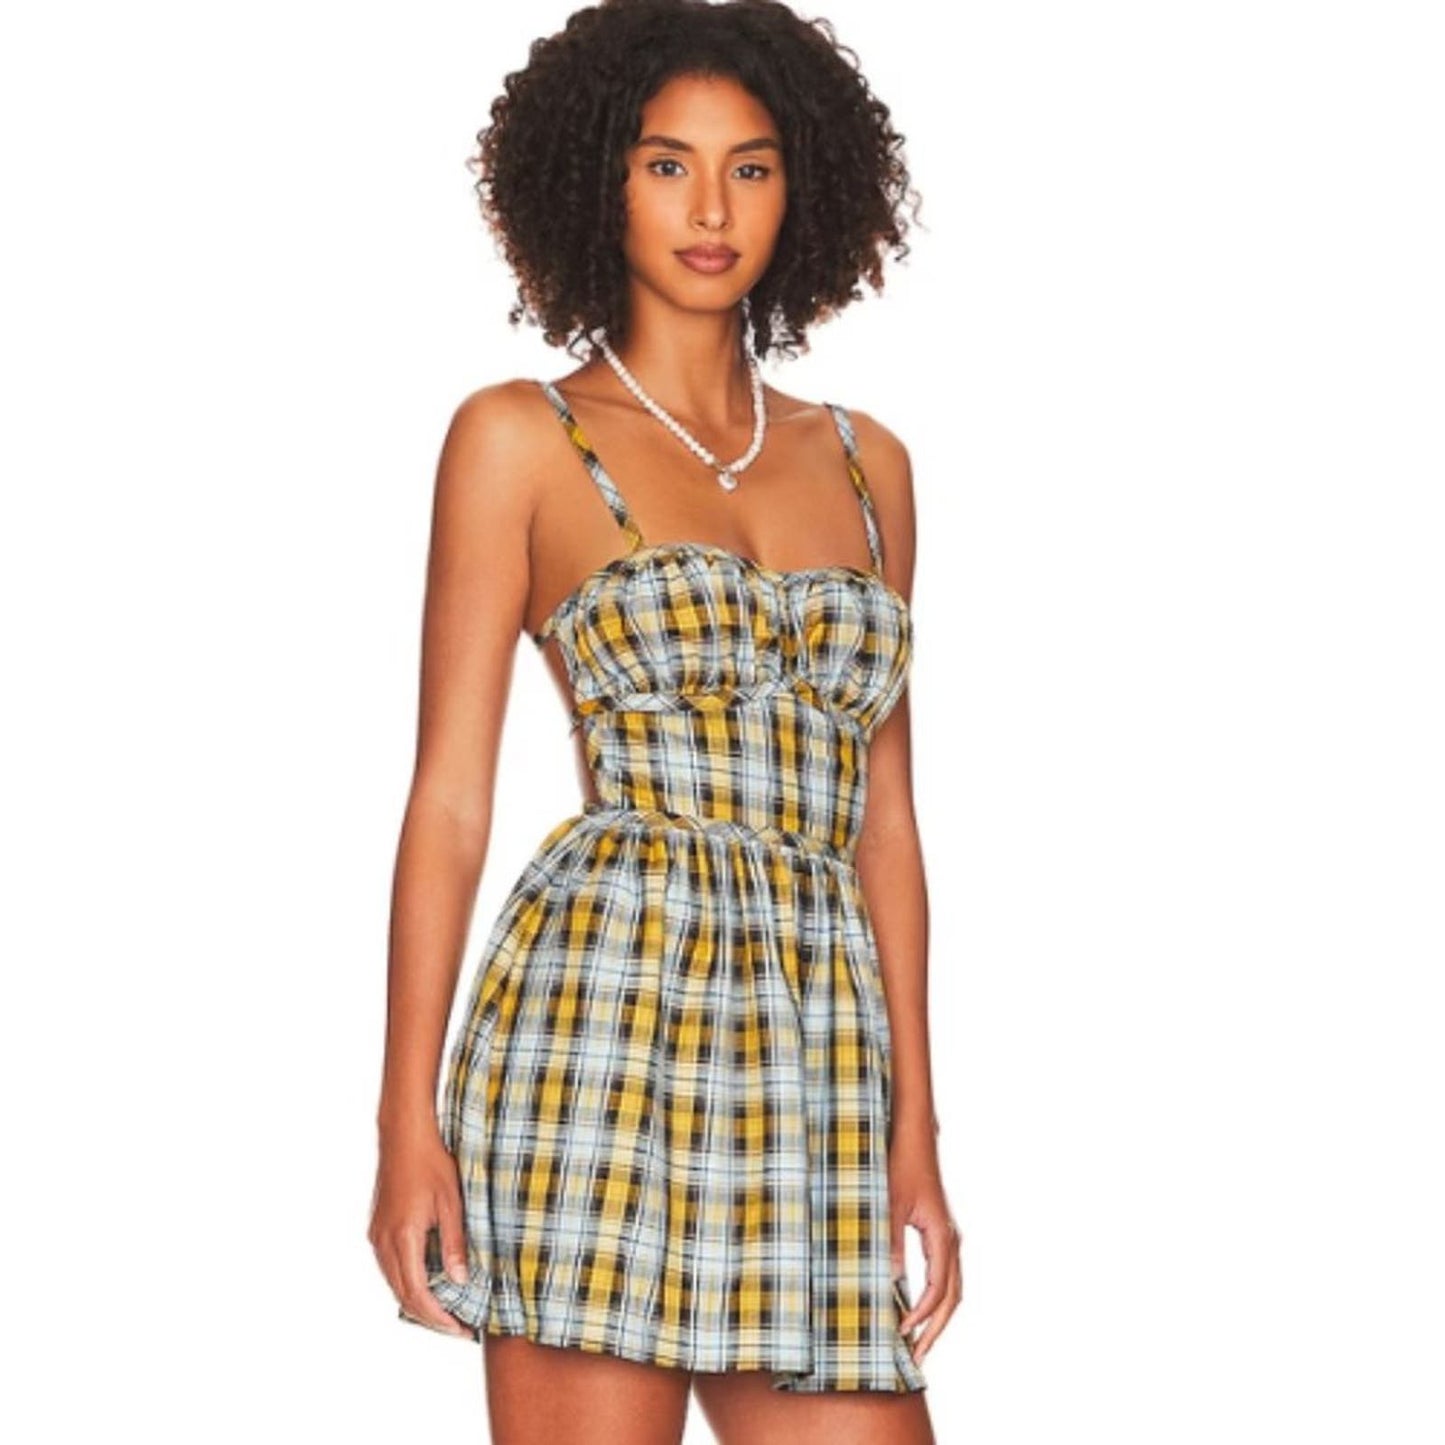 Majorelle Krysta Mini Dress in Yellow and Blue Plaid NWOT Size Small